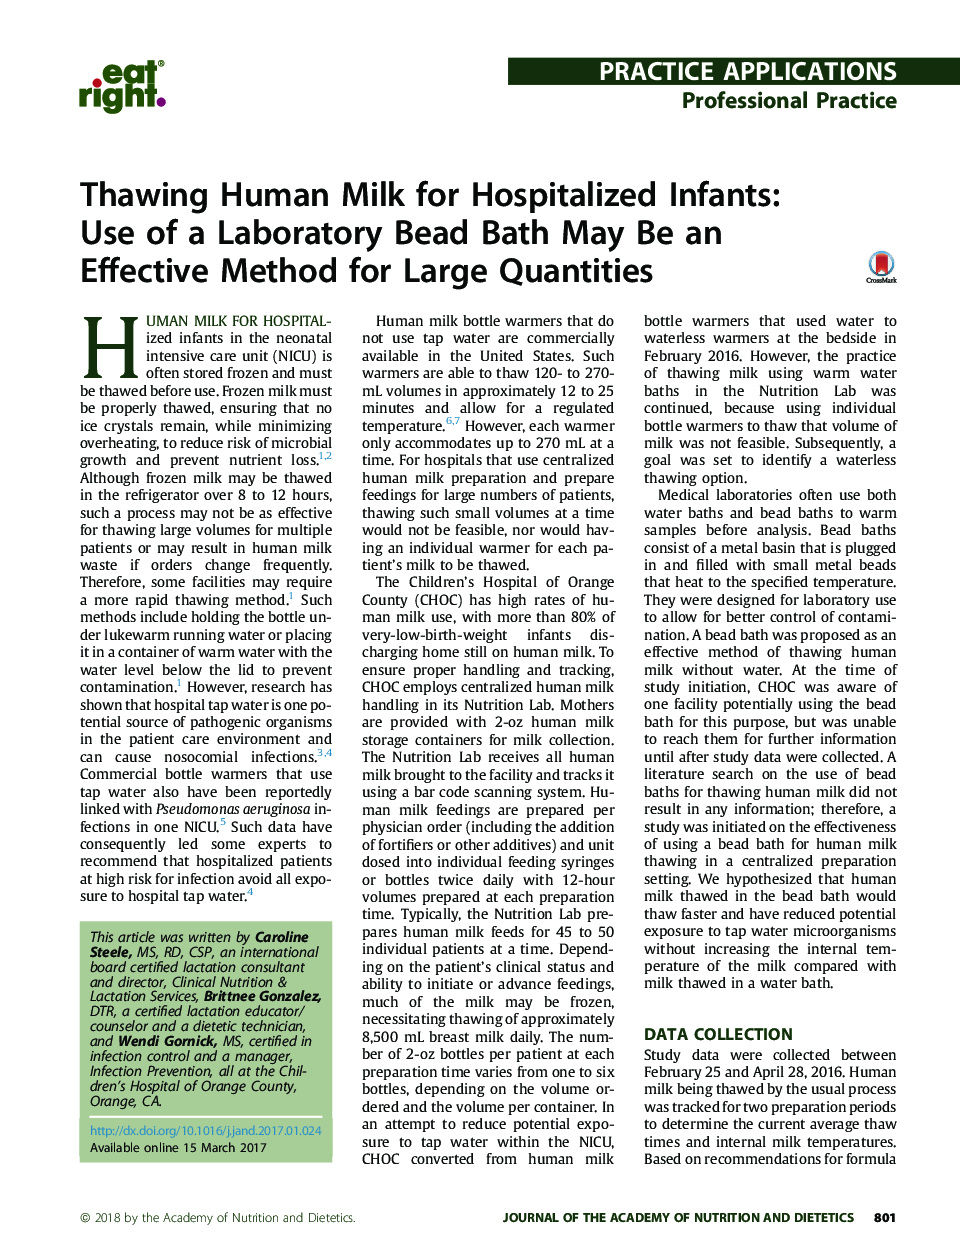 Thawing Human Milk for Hospitalized Infants: Use of a Laboratory Bead Bath May Be an Effective Method for Large Quantities